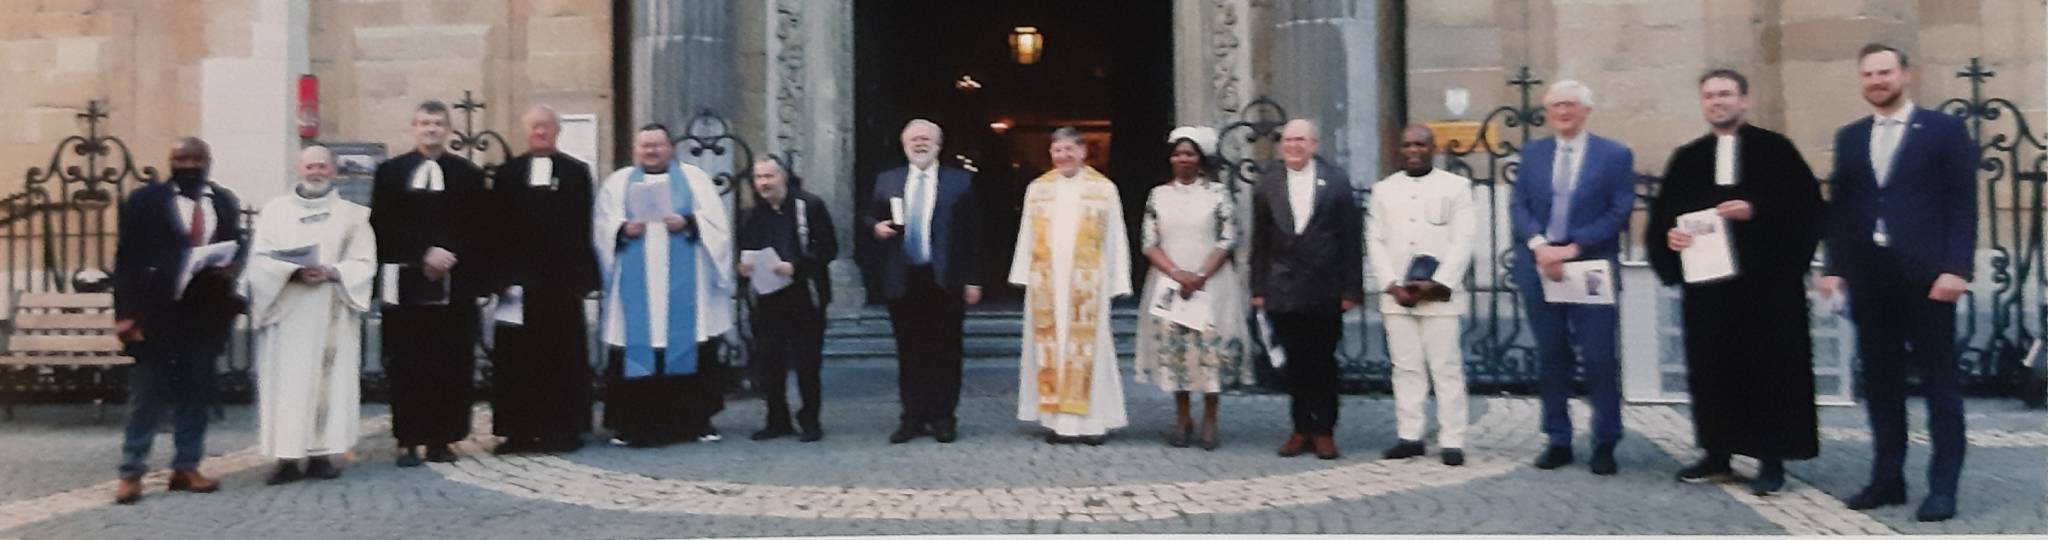 Visitors of Catholic roots visit the Church in Antwerp.